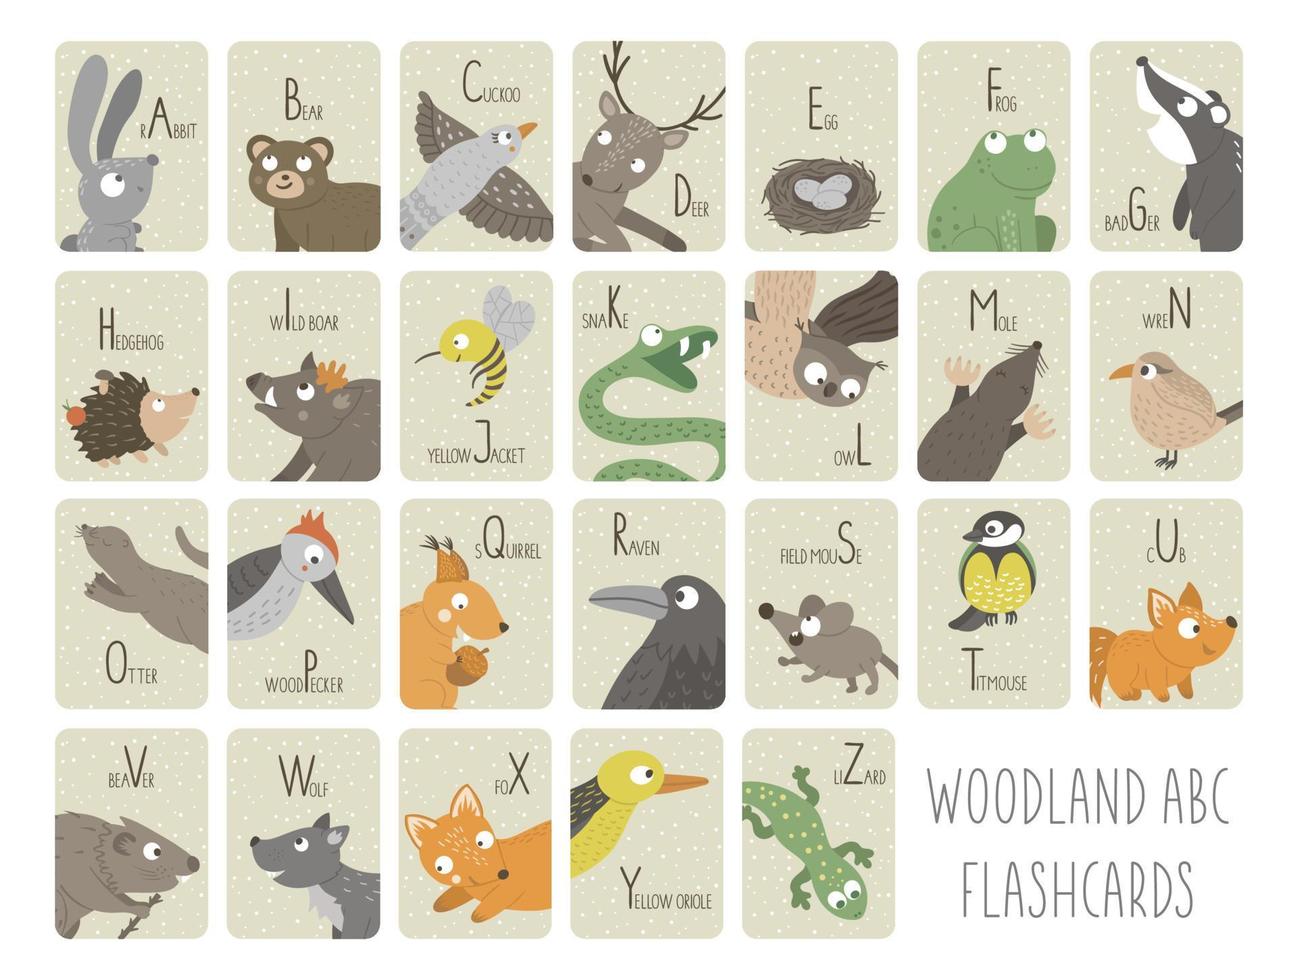 Woodland alphabet cards for children. Cute cartoon ABC set with forest animals. Funny flashcards for teaching reading or phonics for kids. English language letters pack vector